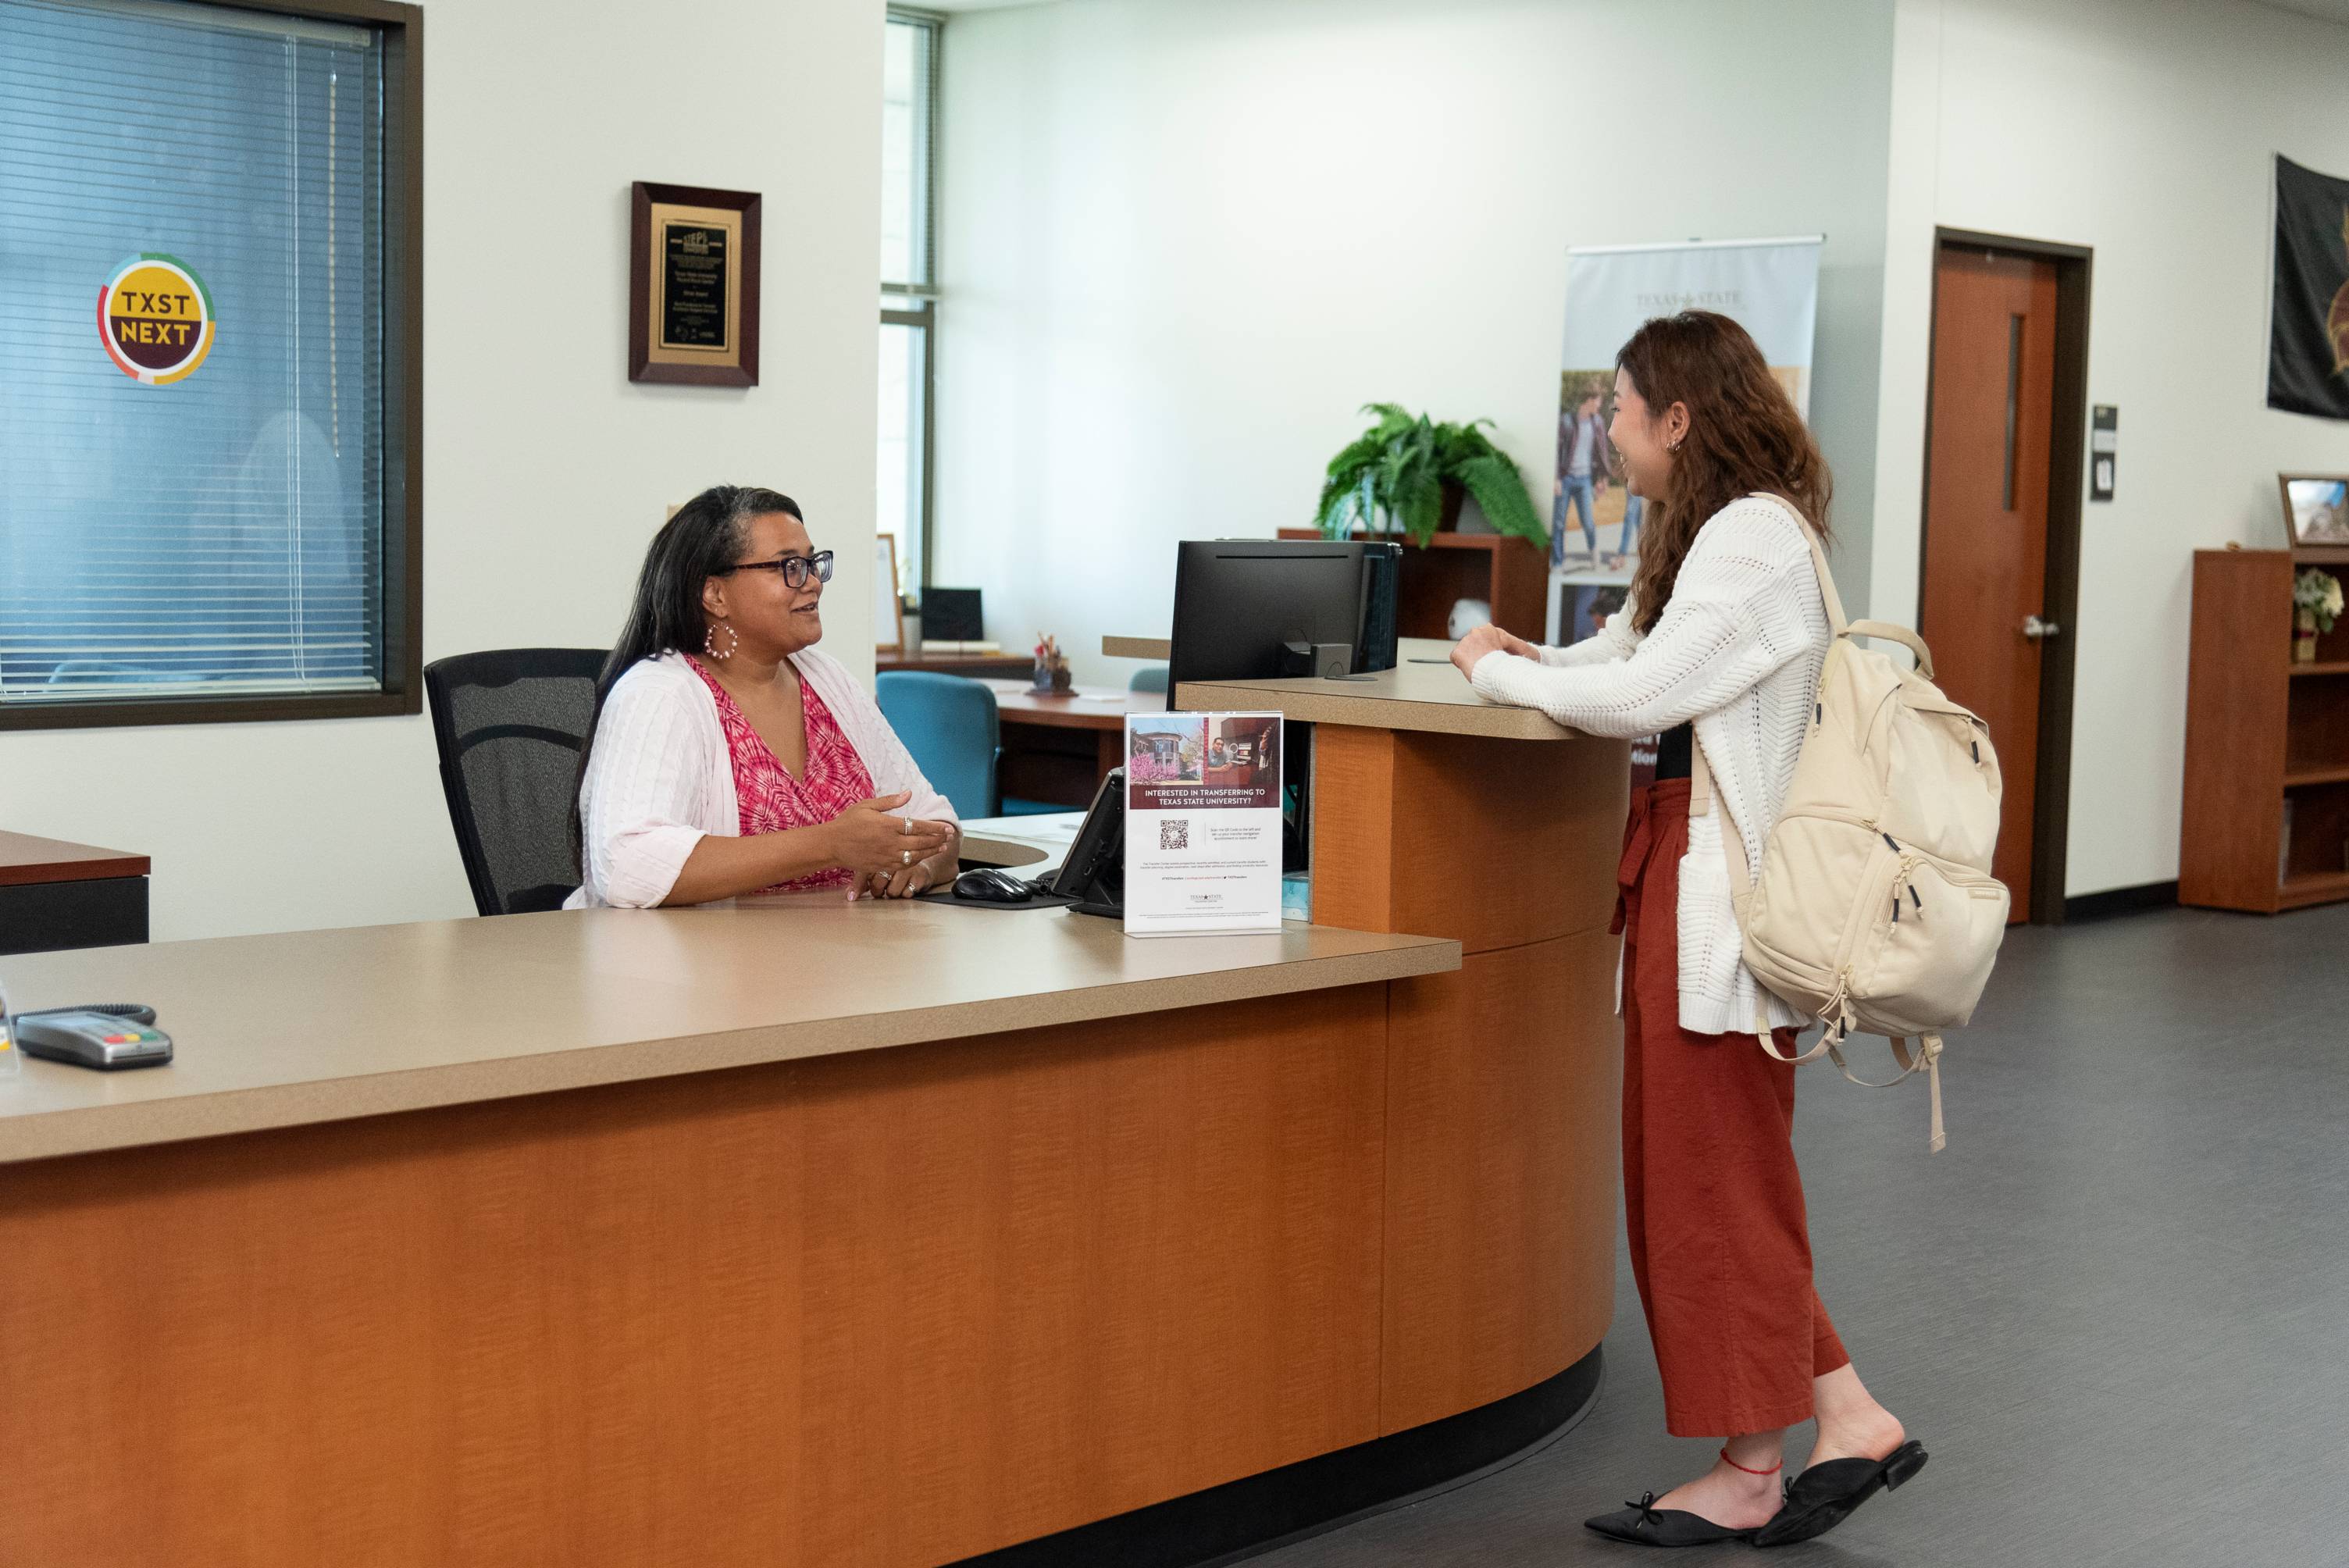 front desk staff talking to a student